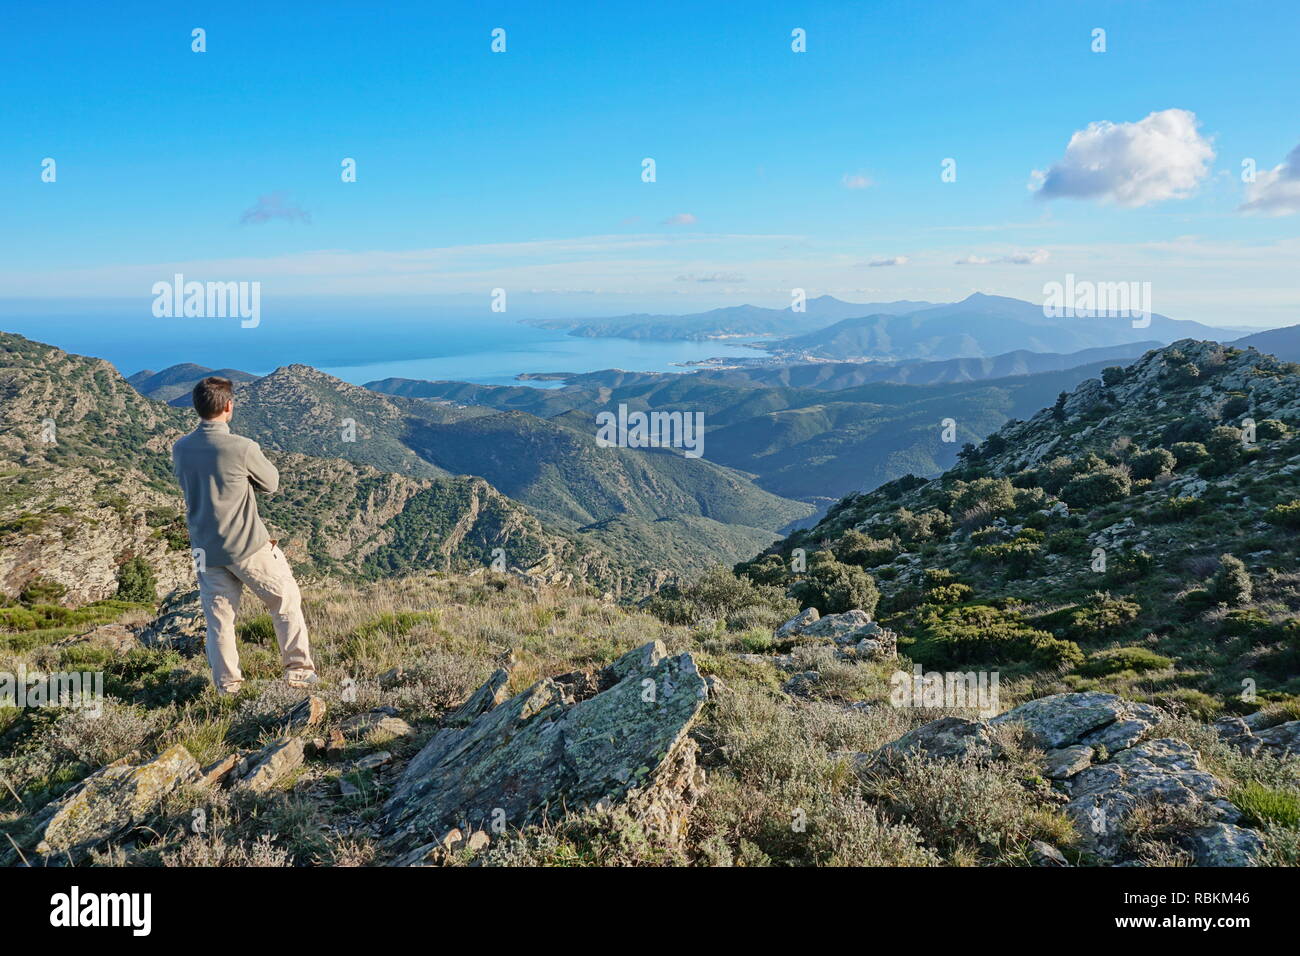 Spain landscape a man standing looking at view from the Albera mountain with the Mediterranean sea and Cap de Creus in background, Pyrenees, Catalonia Stock Photo